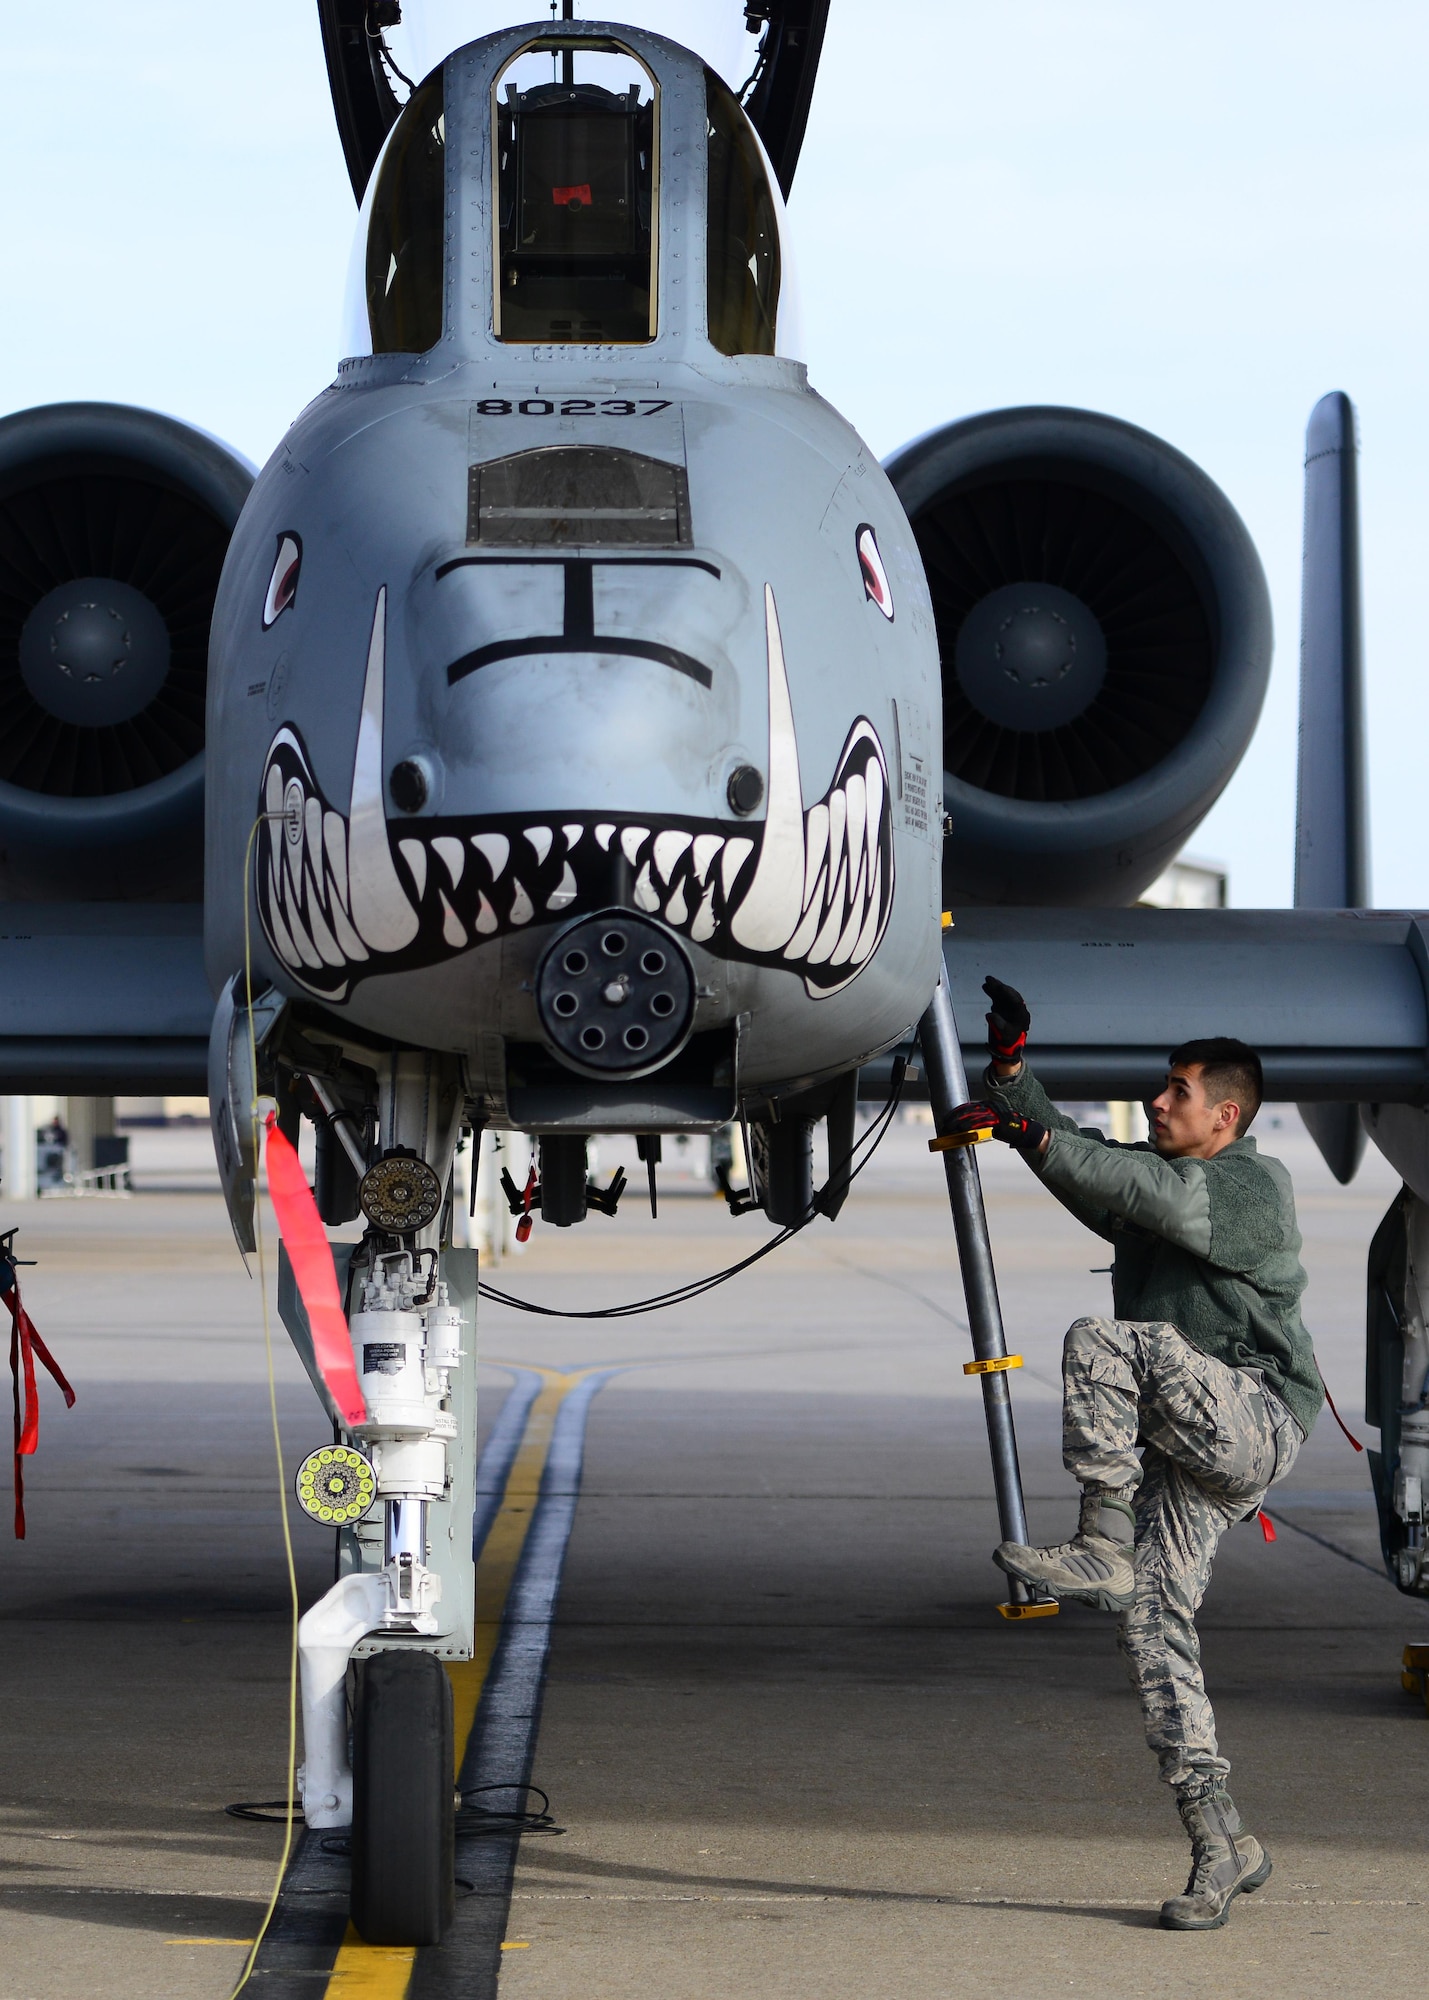 U.S. Air Force Senior Airman Alonso Gudino, a crew chief assigned to the 358th Fighter Squadron, climbs up an A-10 Thunderbolt II aircraft during pre-flight checks prior to a local flying mission at Whiteman Air Force Base, Mo., Feb. 14, 2017. The Thunderbolt II can employ a wide variety of conventional munitions, including general purpose bombs, cluster bomb units, laser guided bombs, joint direct attack munitions (JDAM), wind corrected munitions dispenser (WCMD), AGM-65 Maverick and AIM-9 Sidewinder missiles, rockets, illumination flares, and the GAU-8/A 30mm cannon, capable of firing 3,900 rounds per minute to defeat a wide variety of targets including tanks.